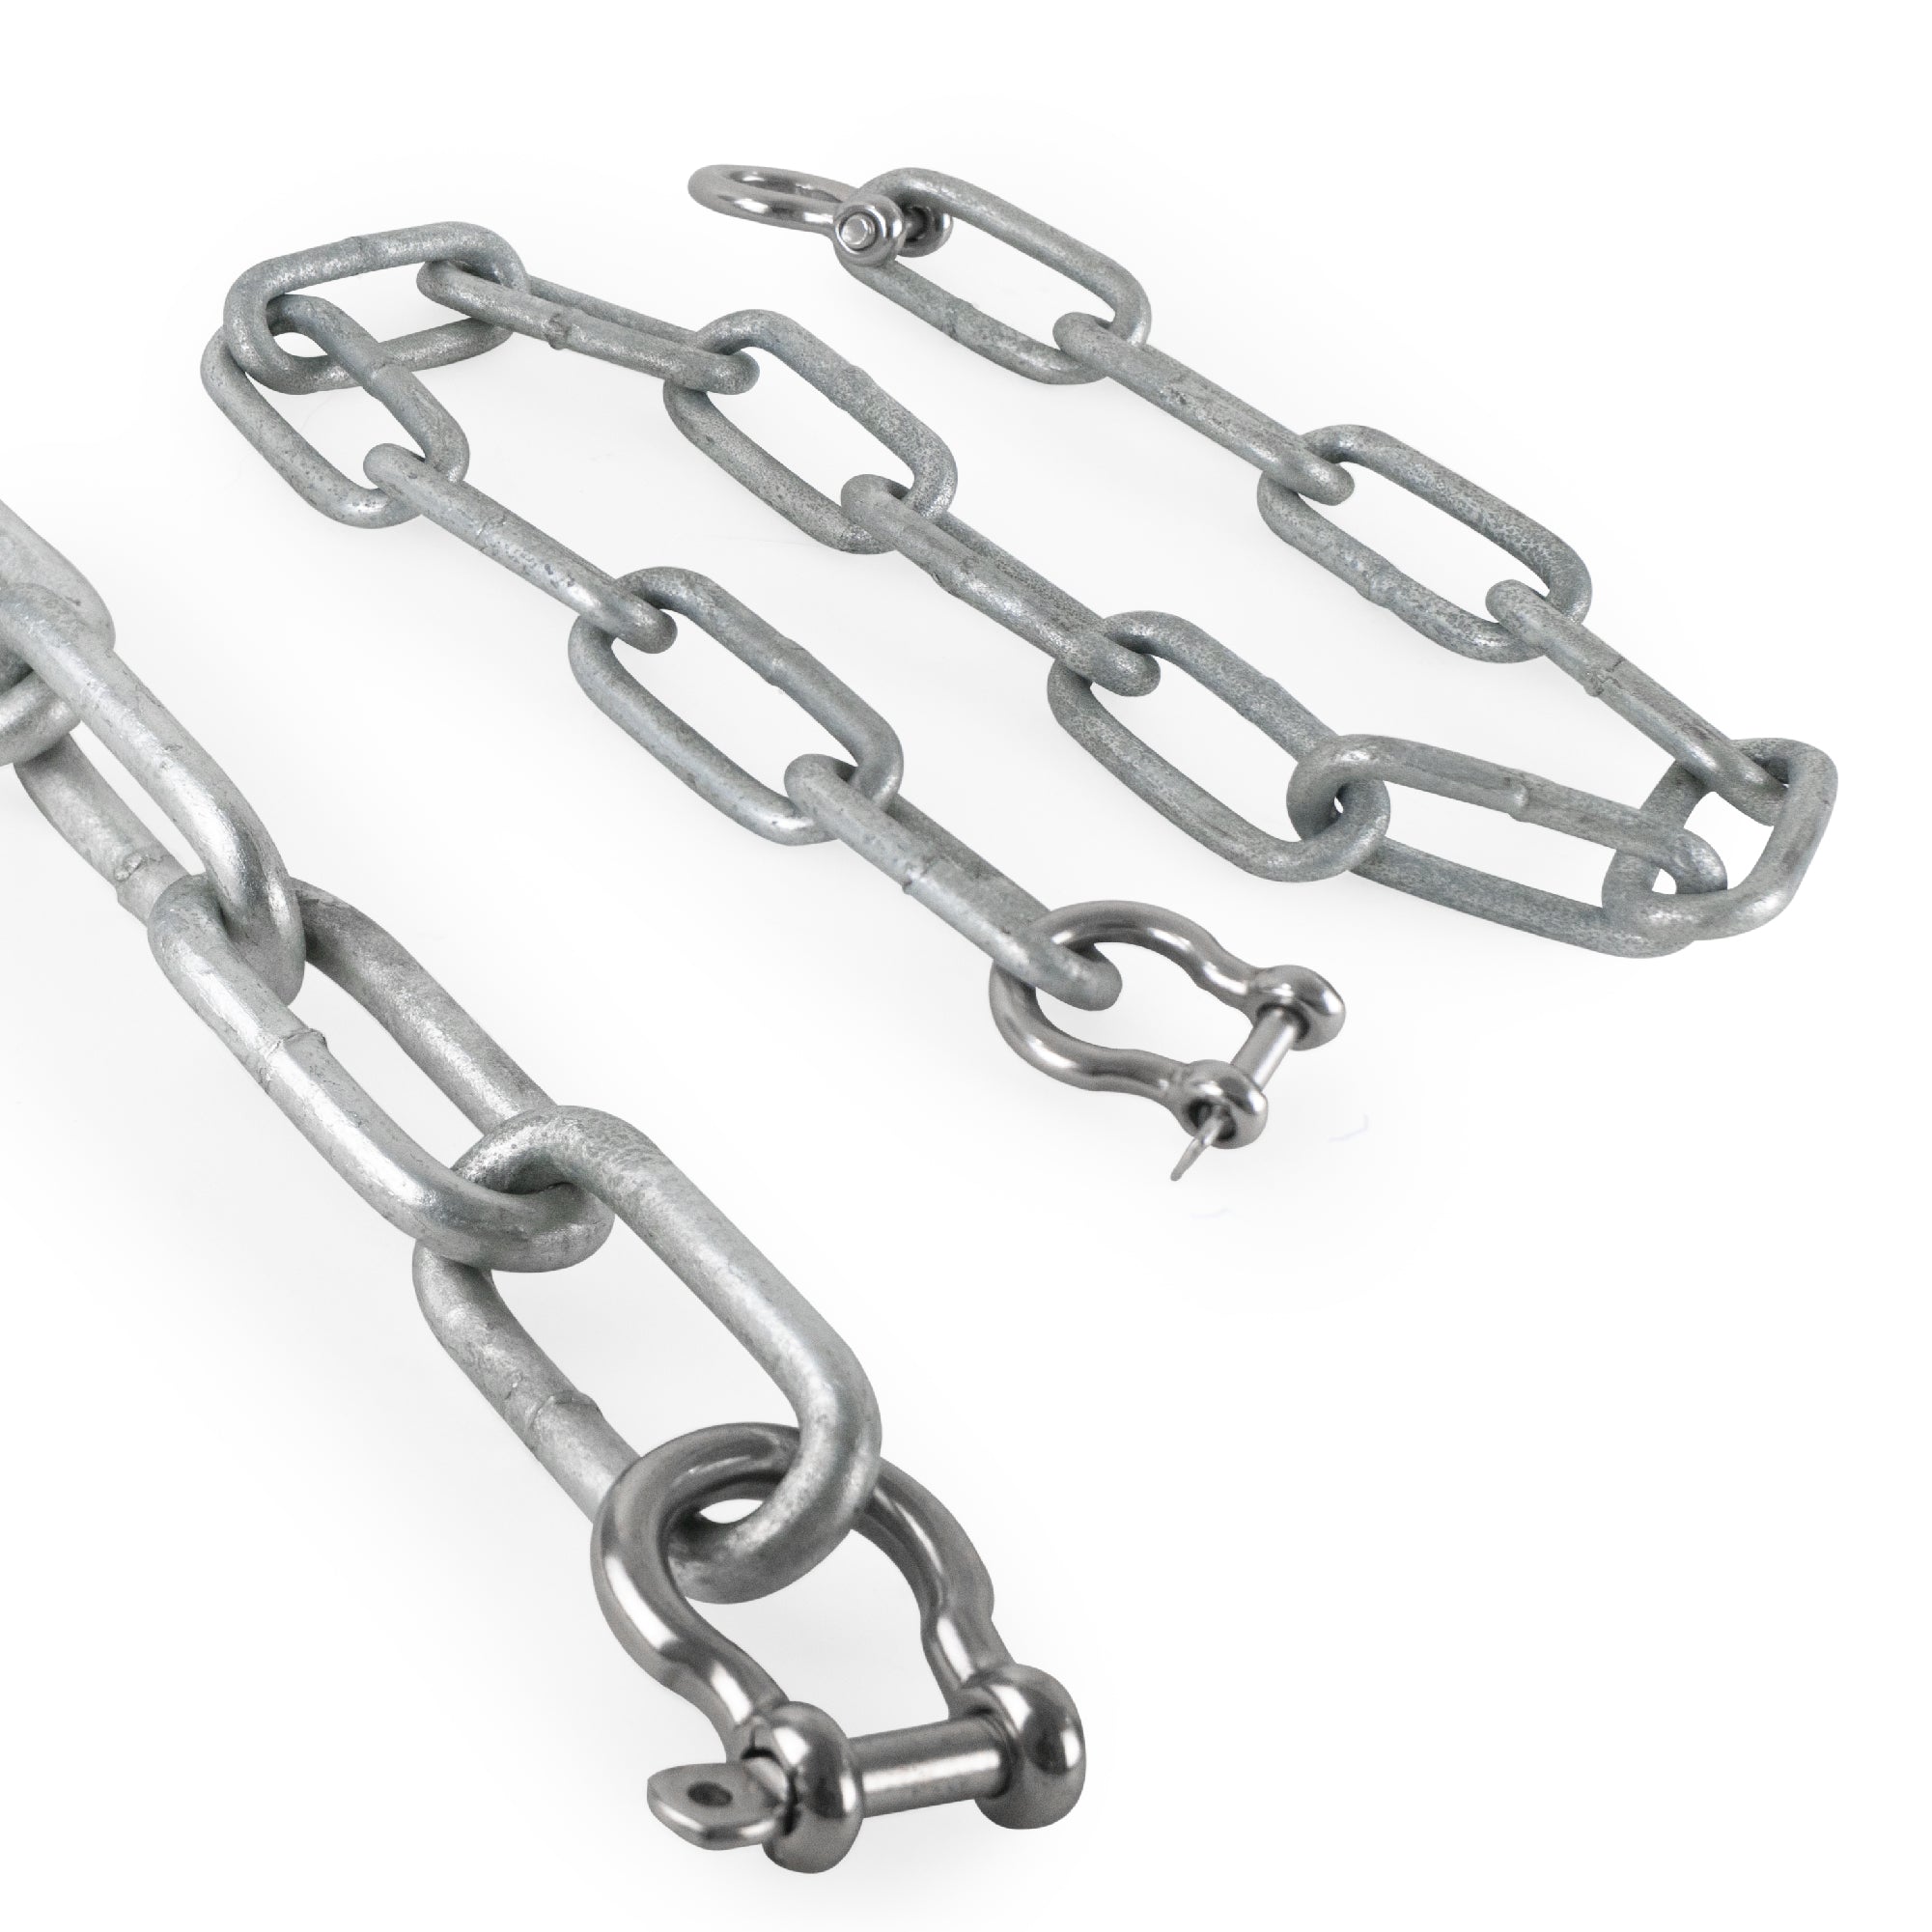 Boat Anchor Lead Chain with Shackles, 1/4 inches x 2 Feet Hot-Dipped Galvanized Steel with 2 AISI316 Stainless Steel 1/4 inches Bow Shackles FO4568-GN2